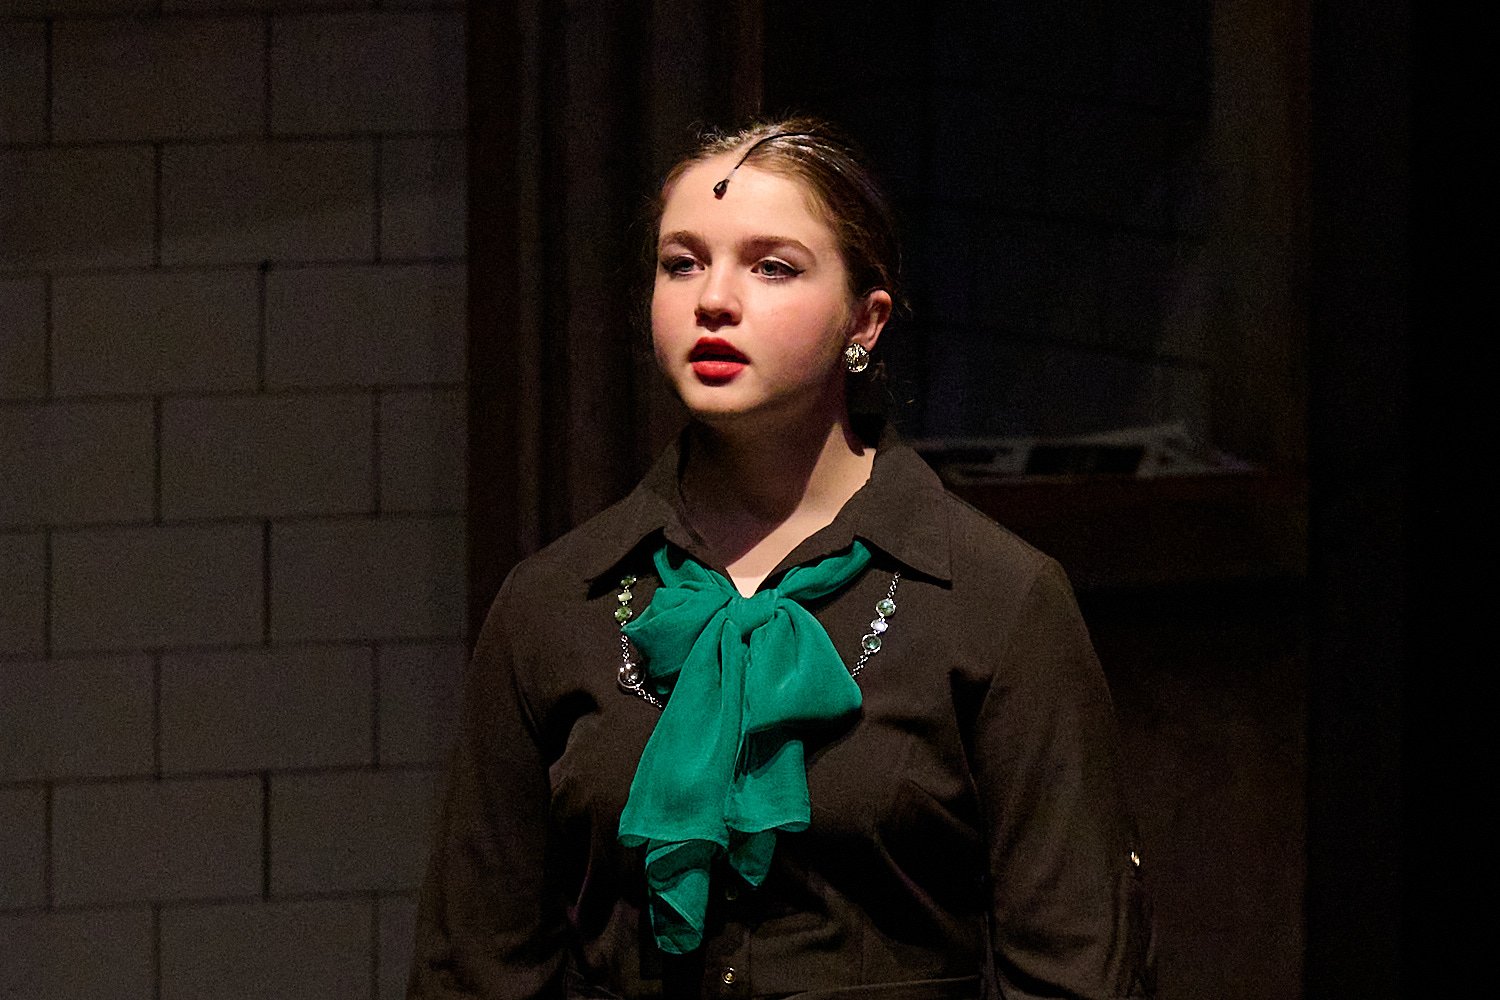  SEWICKLEY, PA, USA - MARCH 2ND 2022: High School students of Sewickley Academy are performing in an annual musical show “Urinetown” running on March 3rd-5th 2022. Grace Armutat 